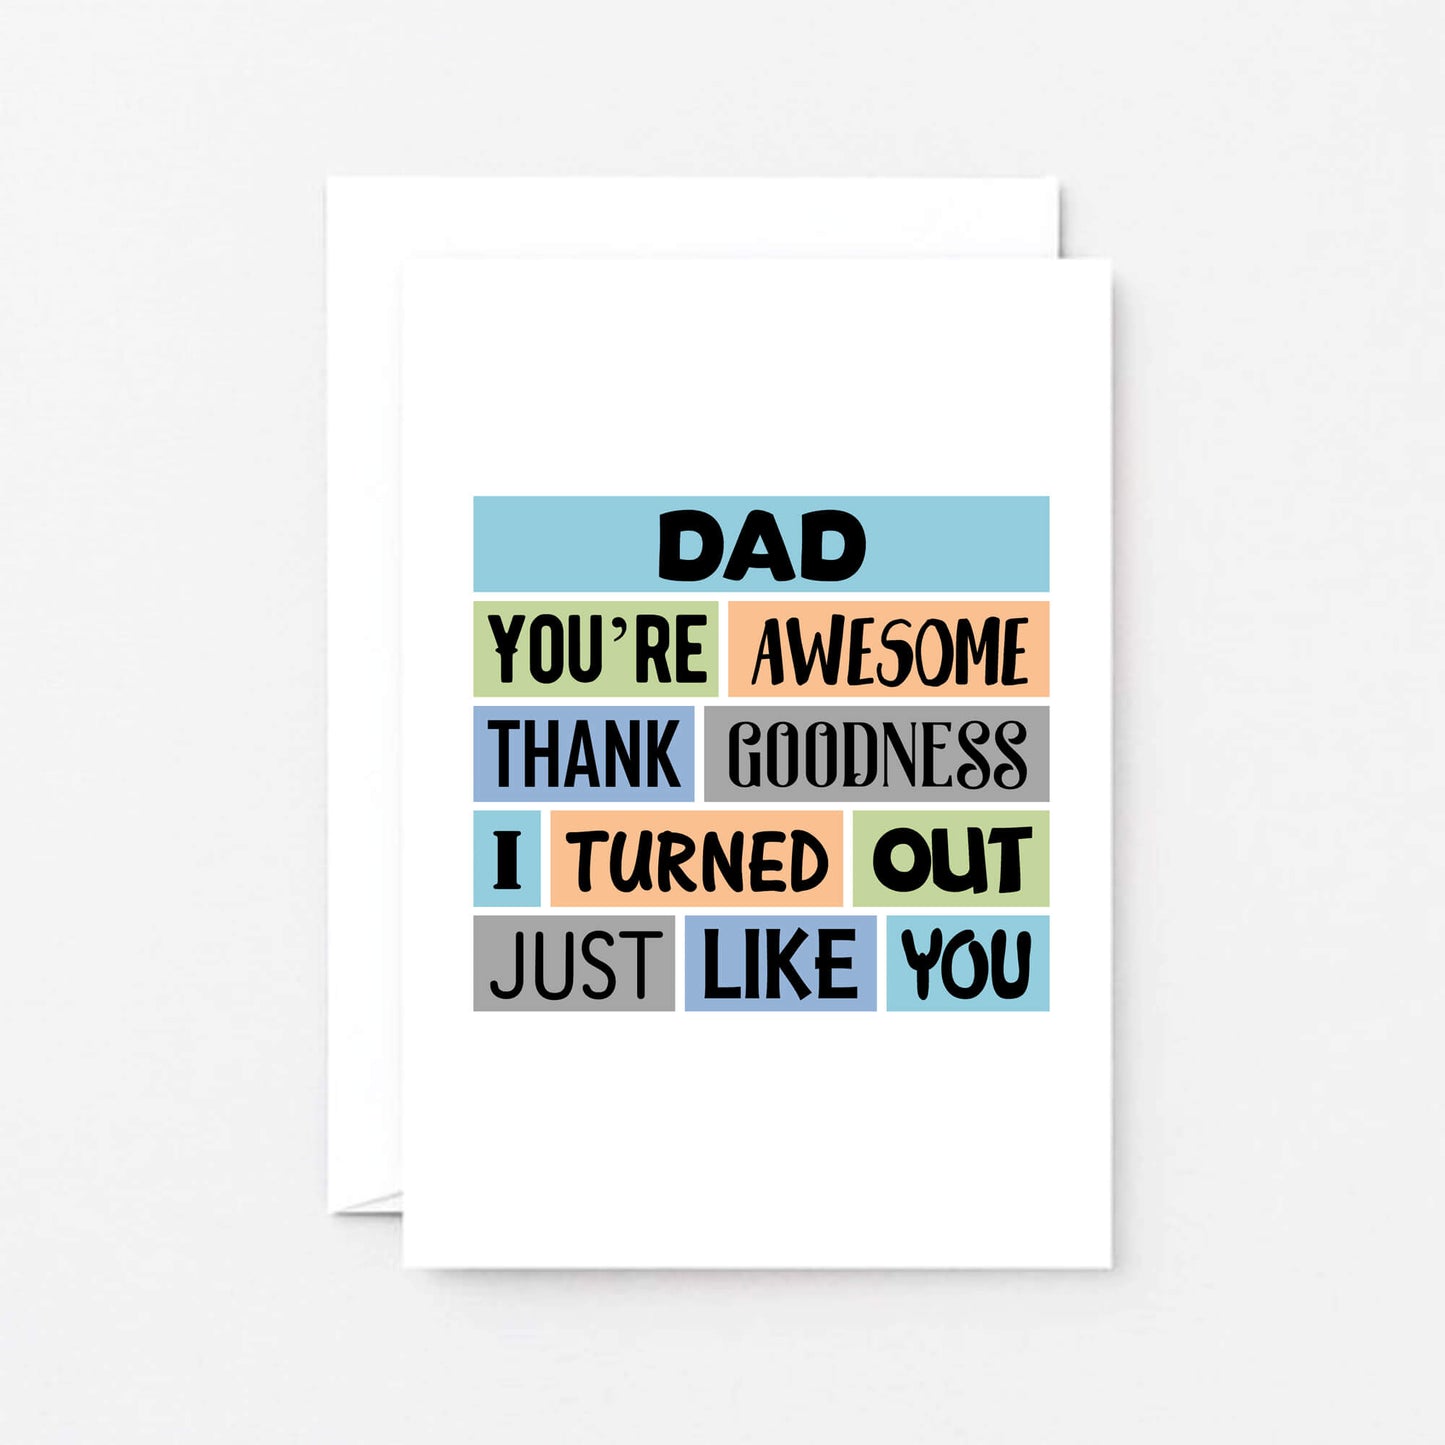 Dad Card by SixElevenCreations. Reads Dad You're awesome. Thank goodness I turned out just like you. Product Code SE0161A6